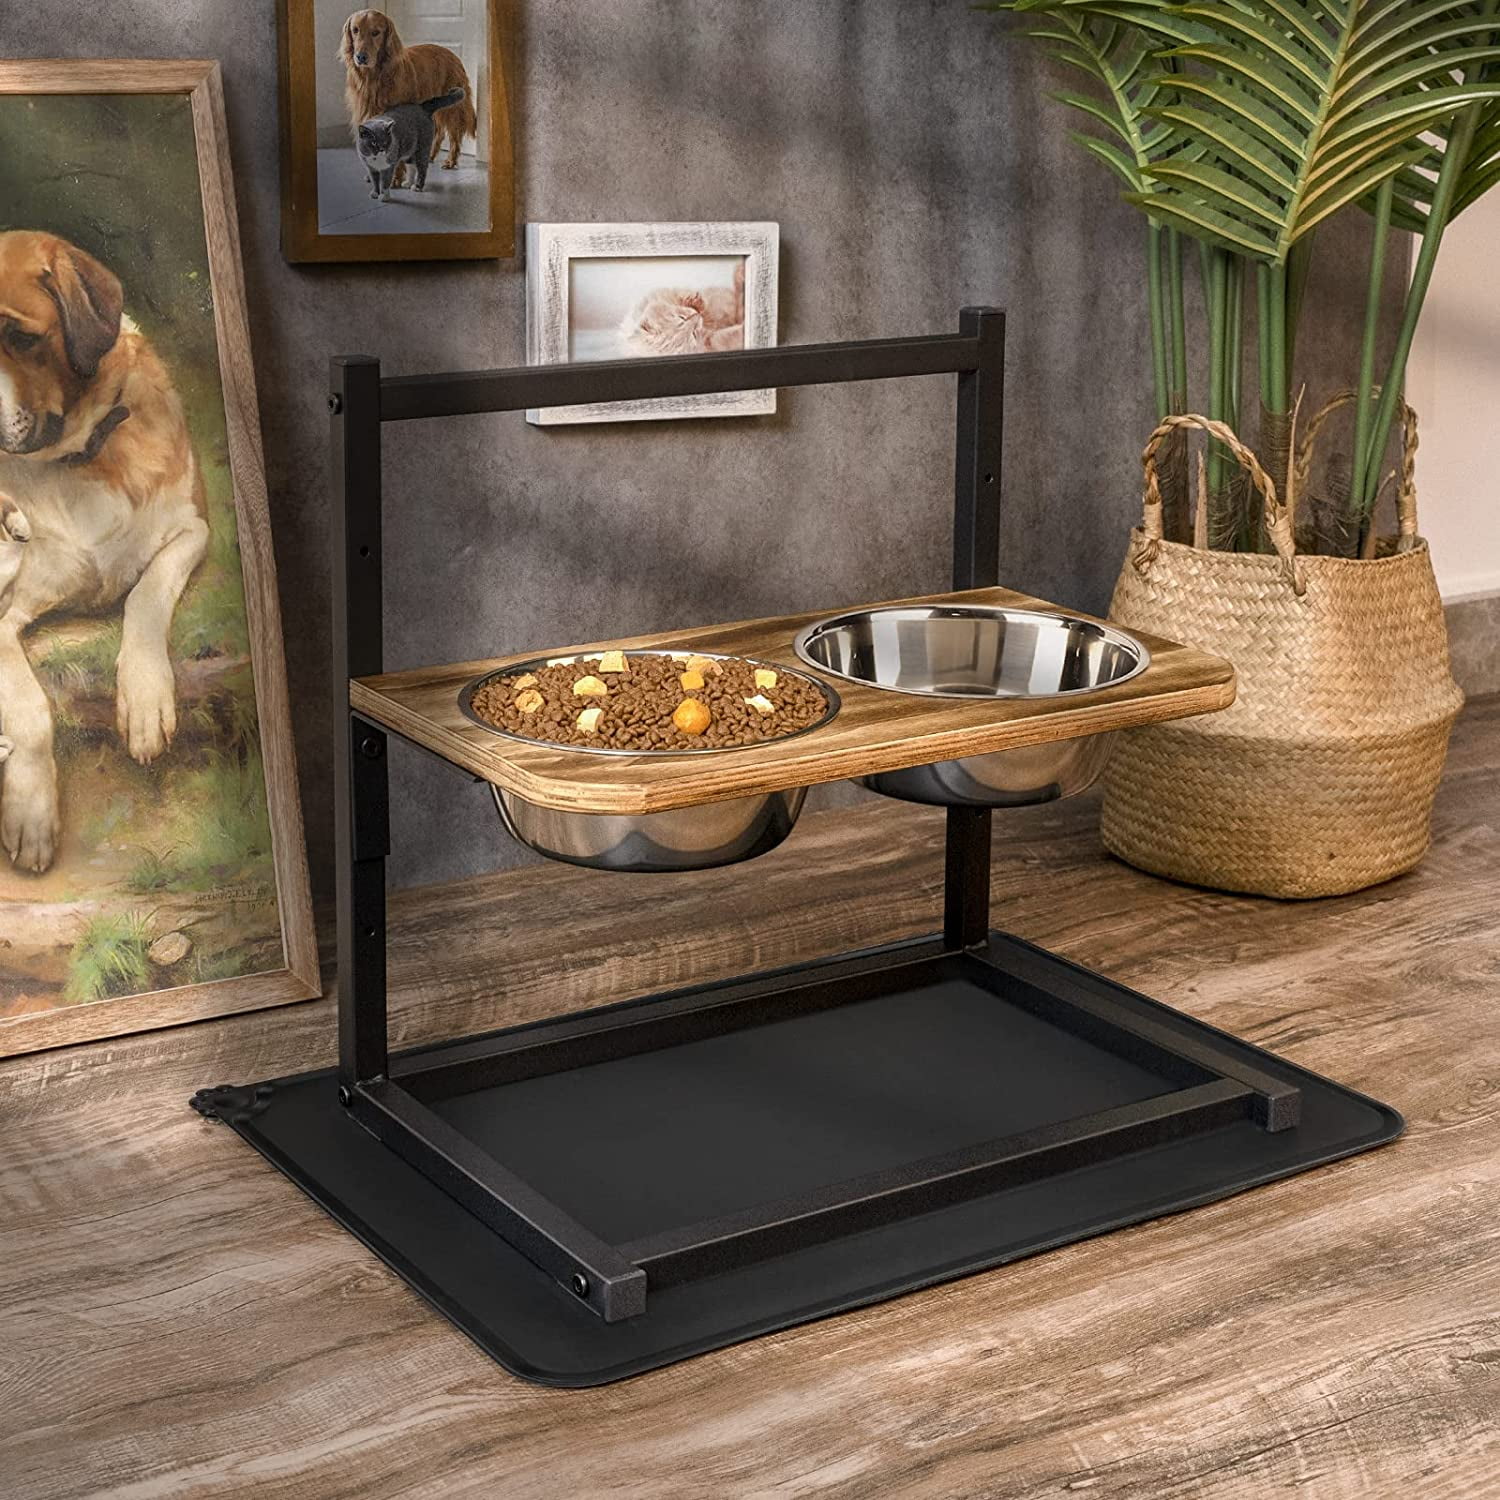 Adjustable Height Raised Dog Bowls With Slow Feeder And Standing Feature  Perfect For Elevated Dog Food Stand And Table 2 In 1 Food And Water Bowl  231023 From Jia10, $23.89